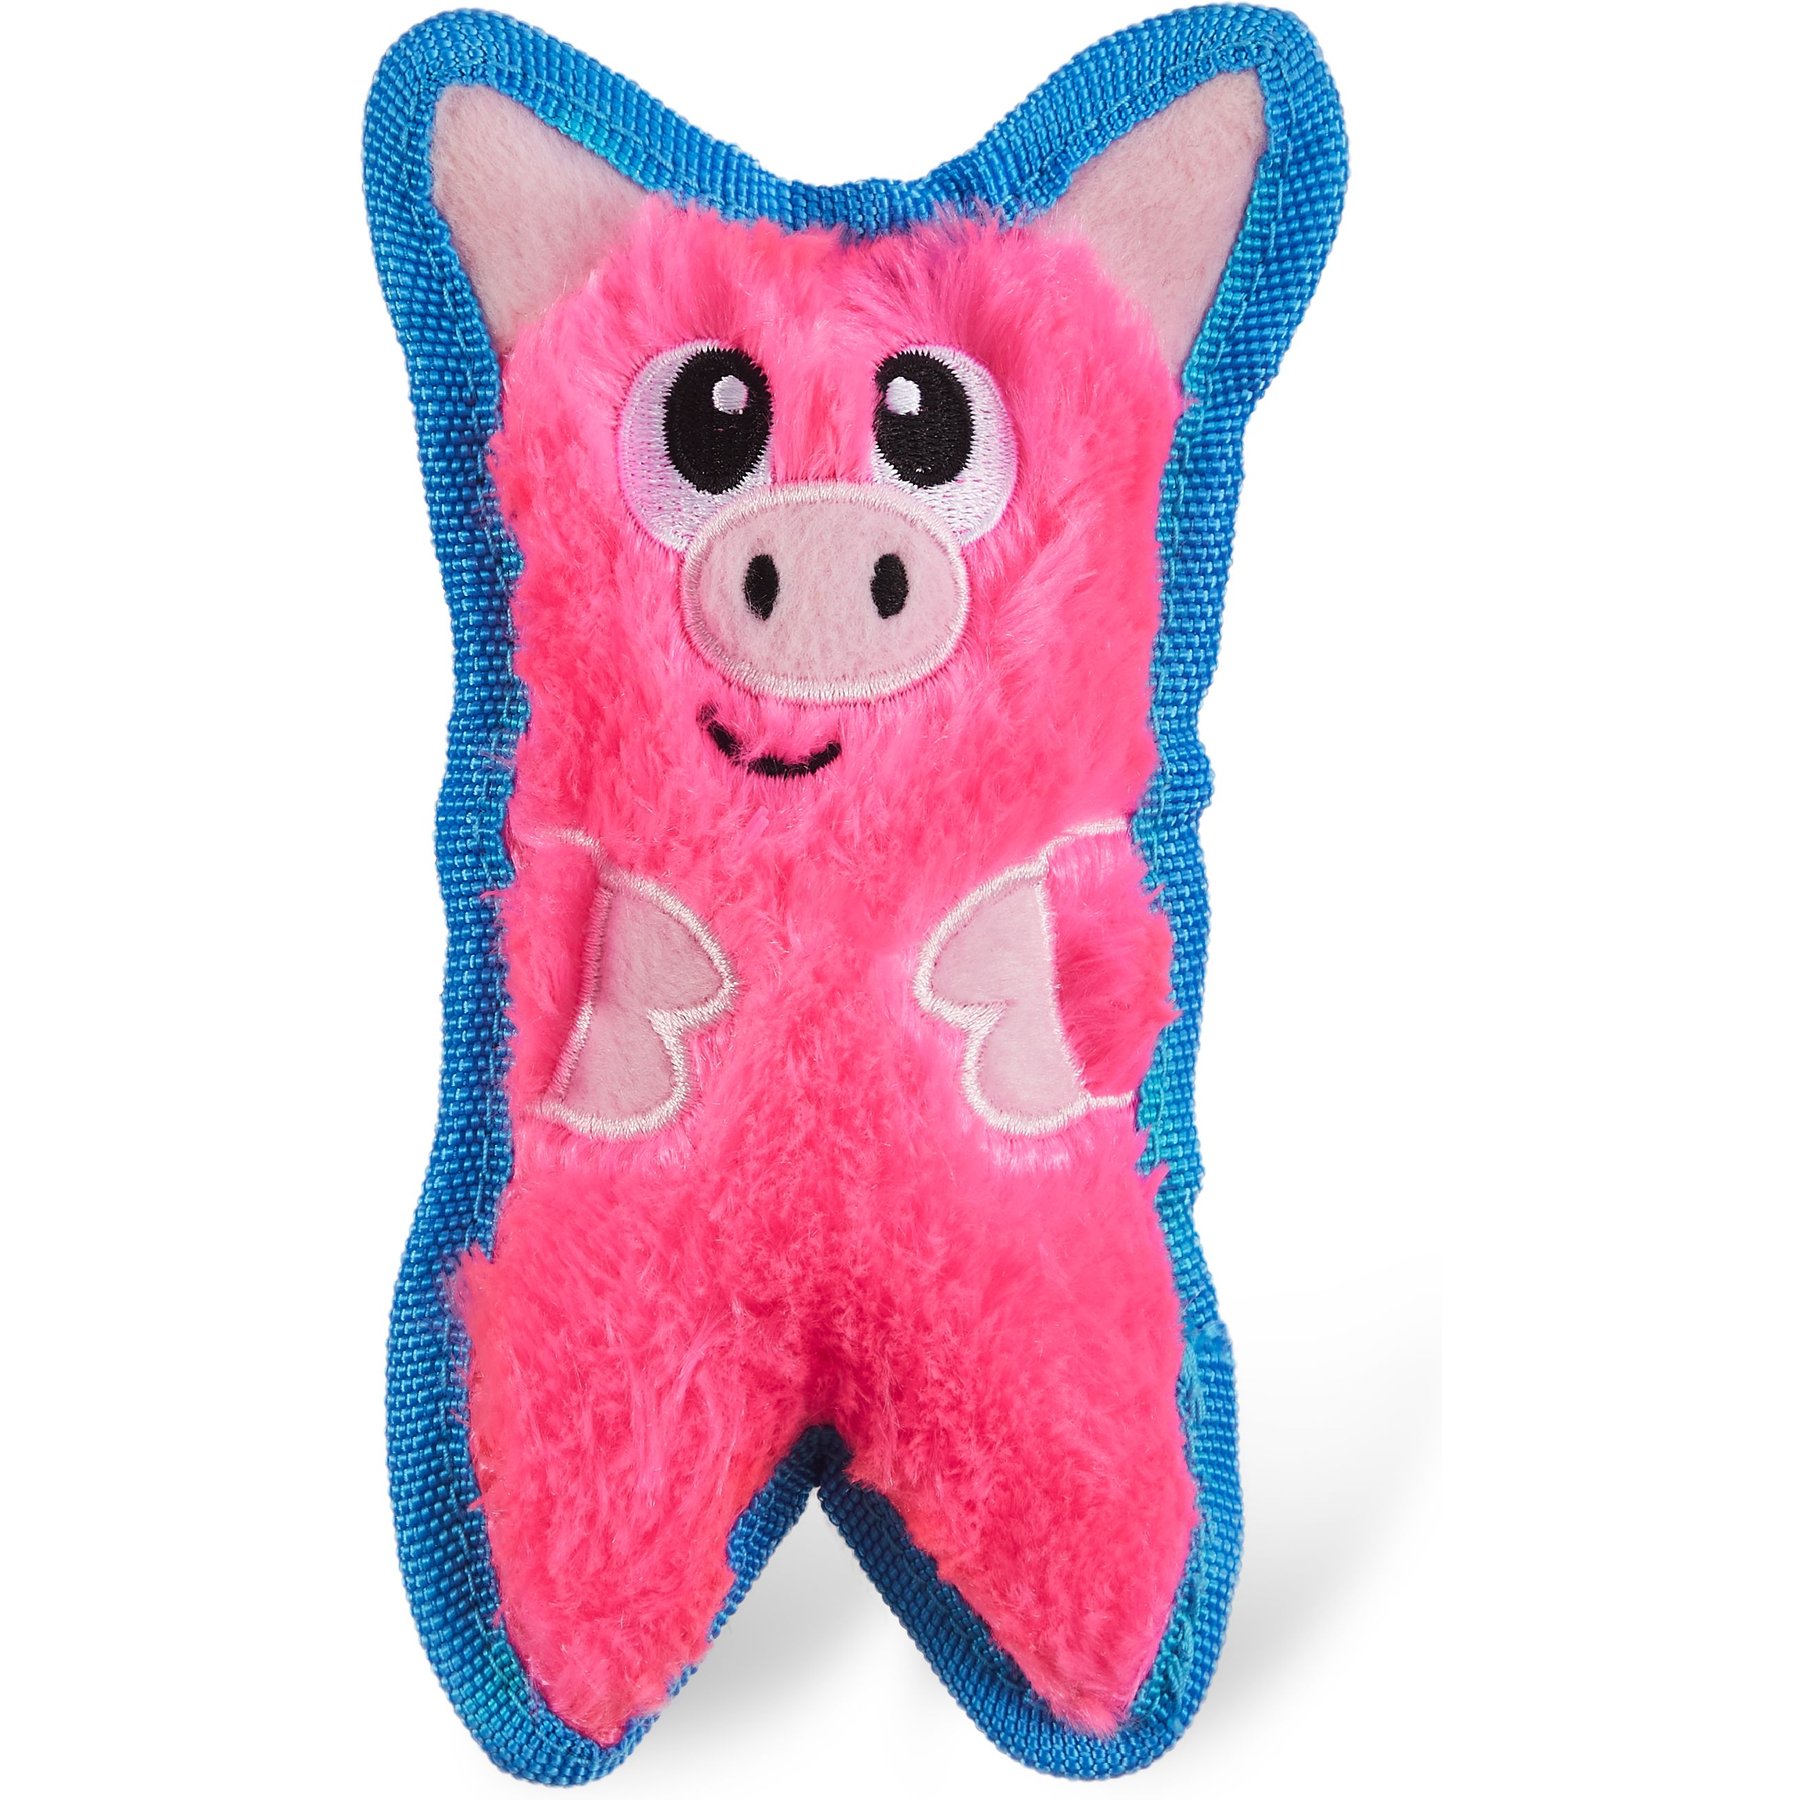 Outward Hound Tail Poppers Pig Plush Dog Toy